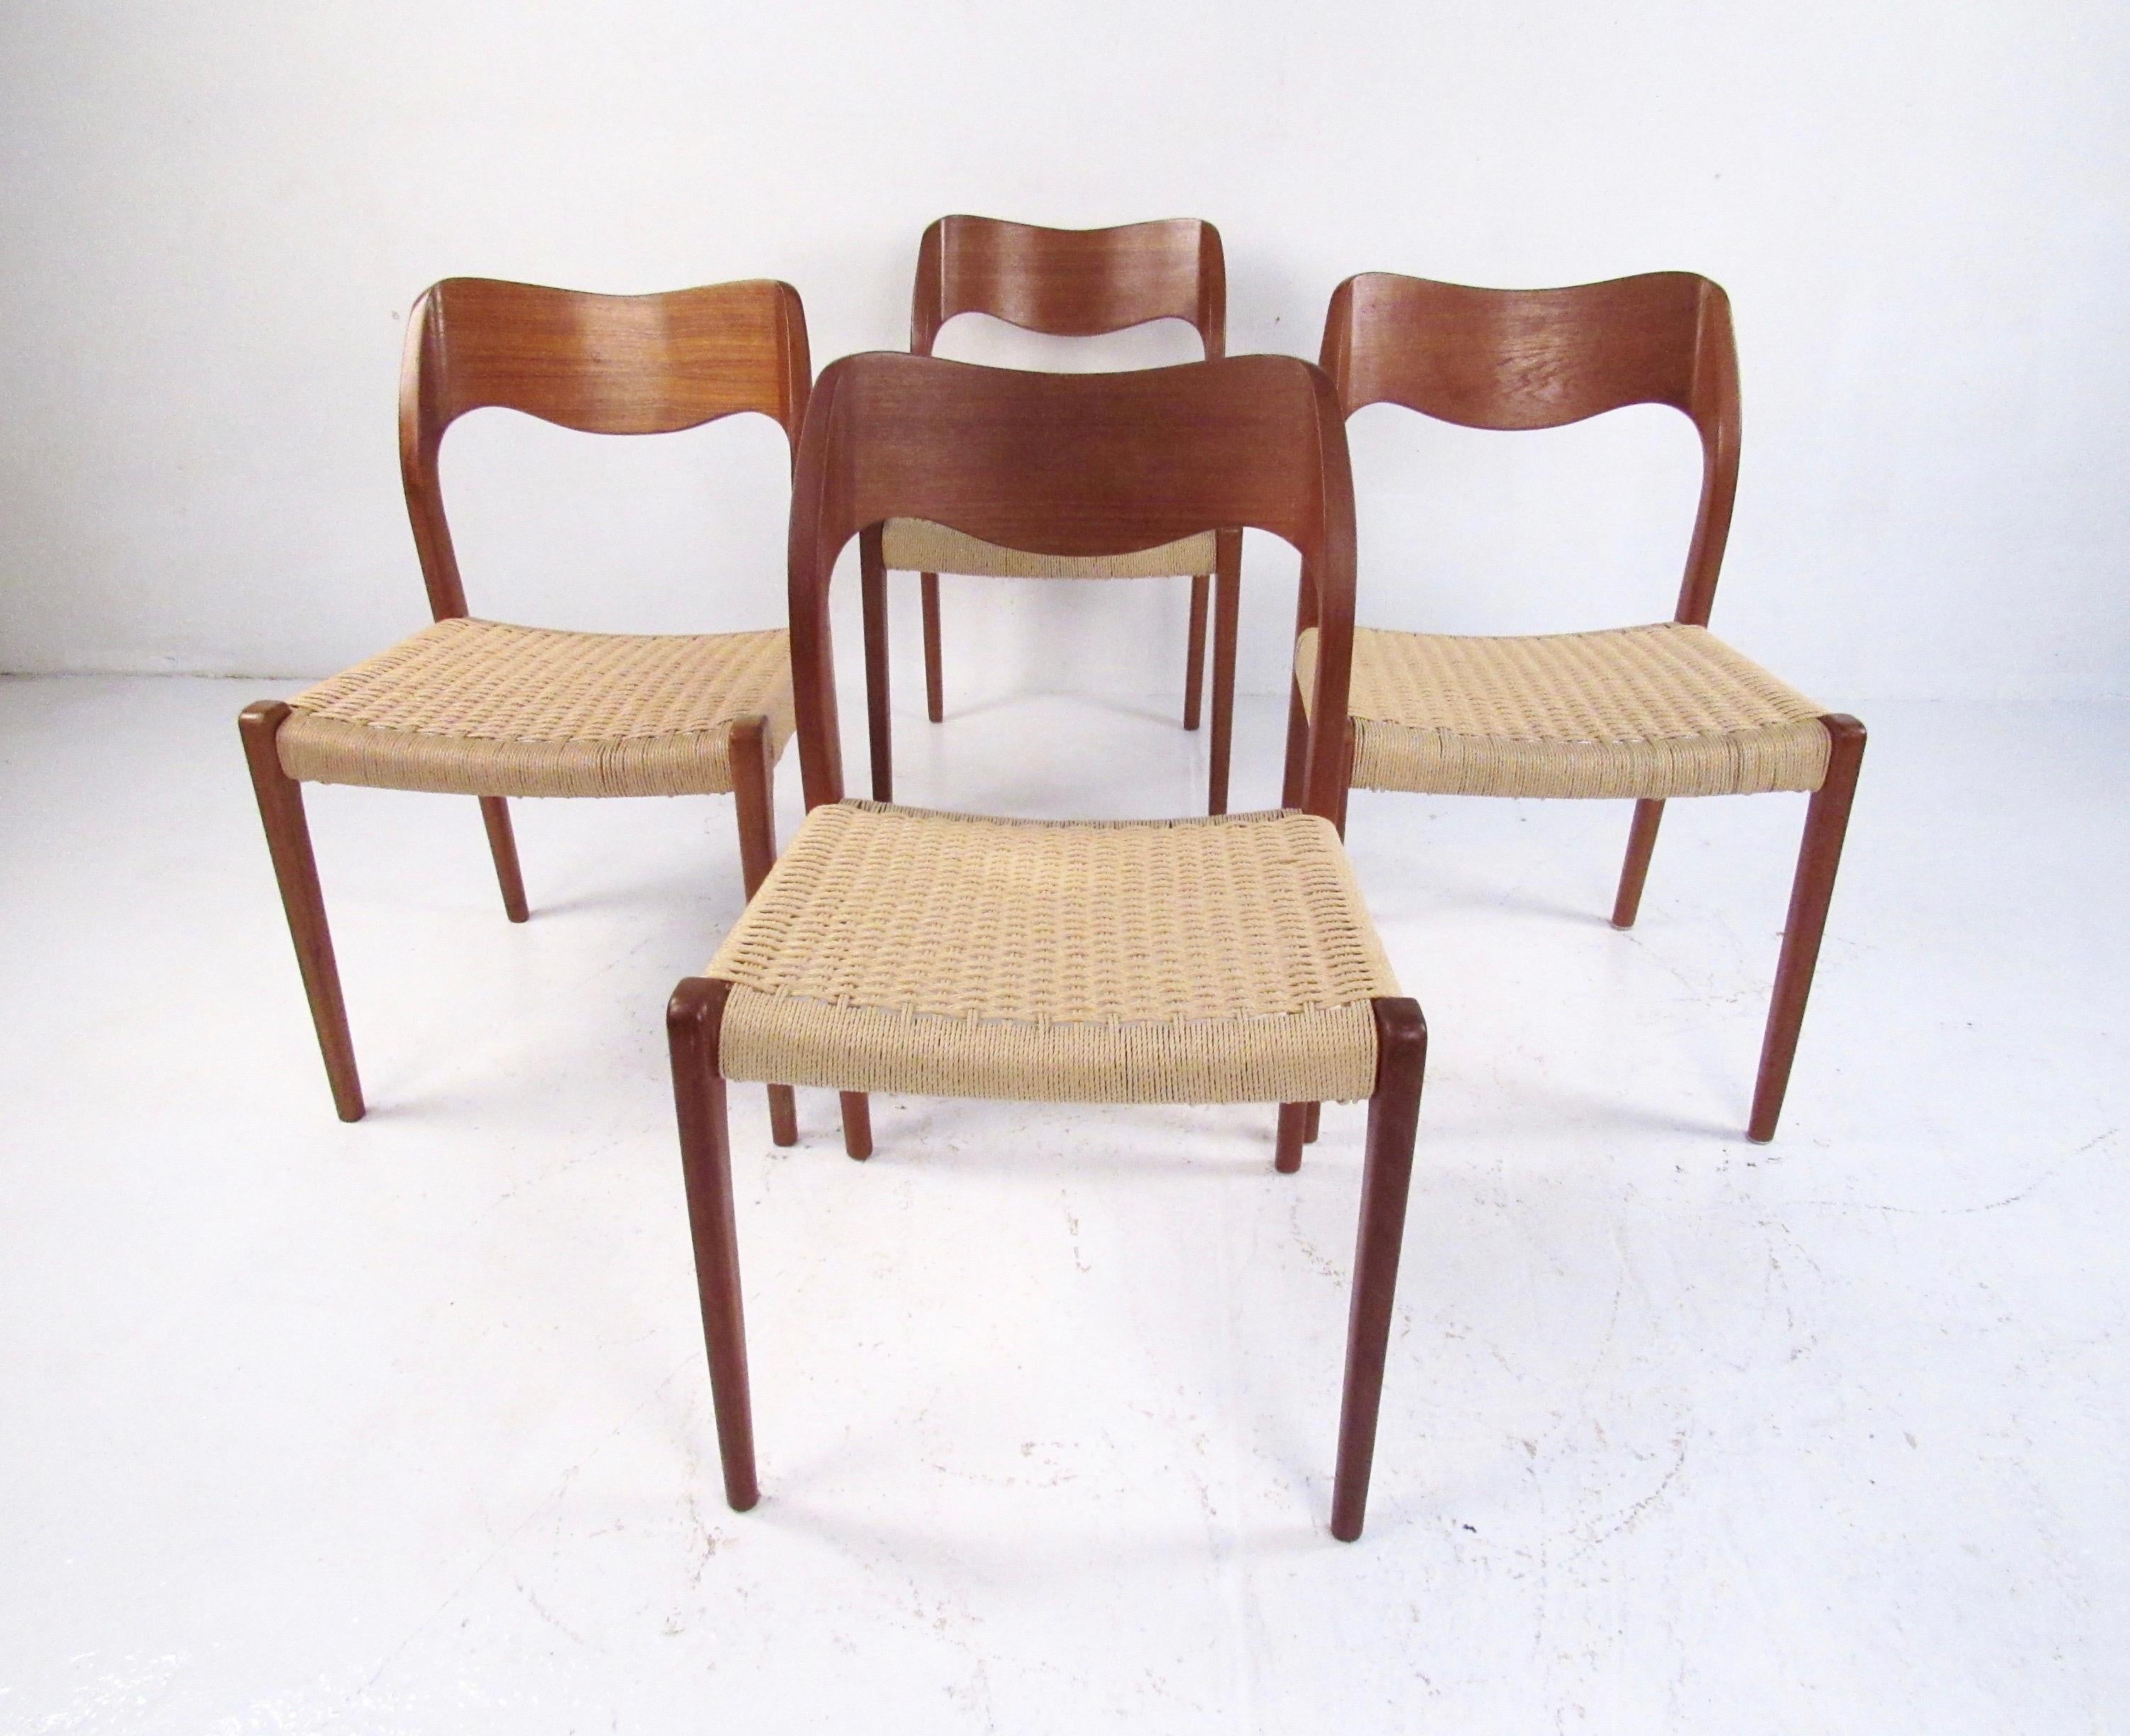 This stylish set of four Scandinavian Modern dining chairs feature sculpted teak frames, unique papercord seats, and iconic N.O. Møller design. Perfect set of Mid-Century Modern Danish chairs for kitchen or dining room seating. Please confirm item